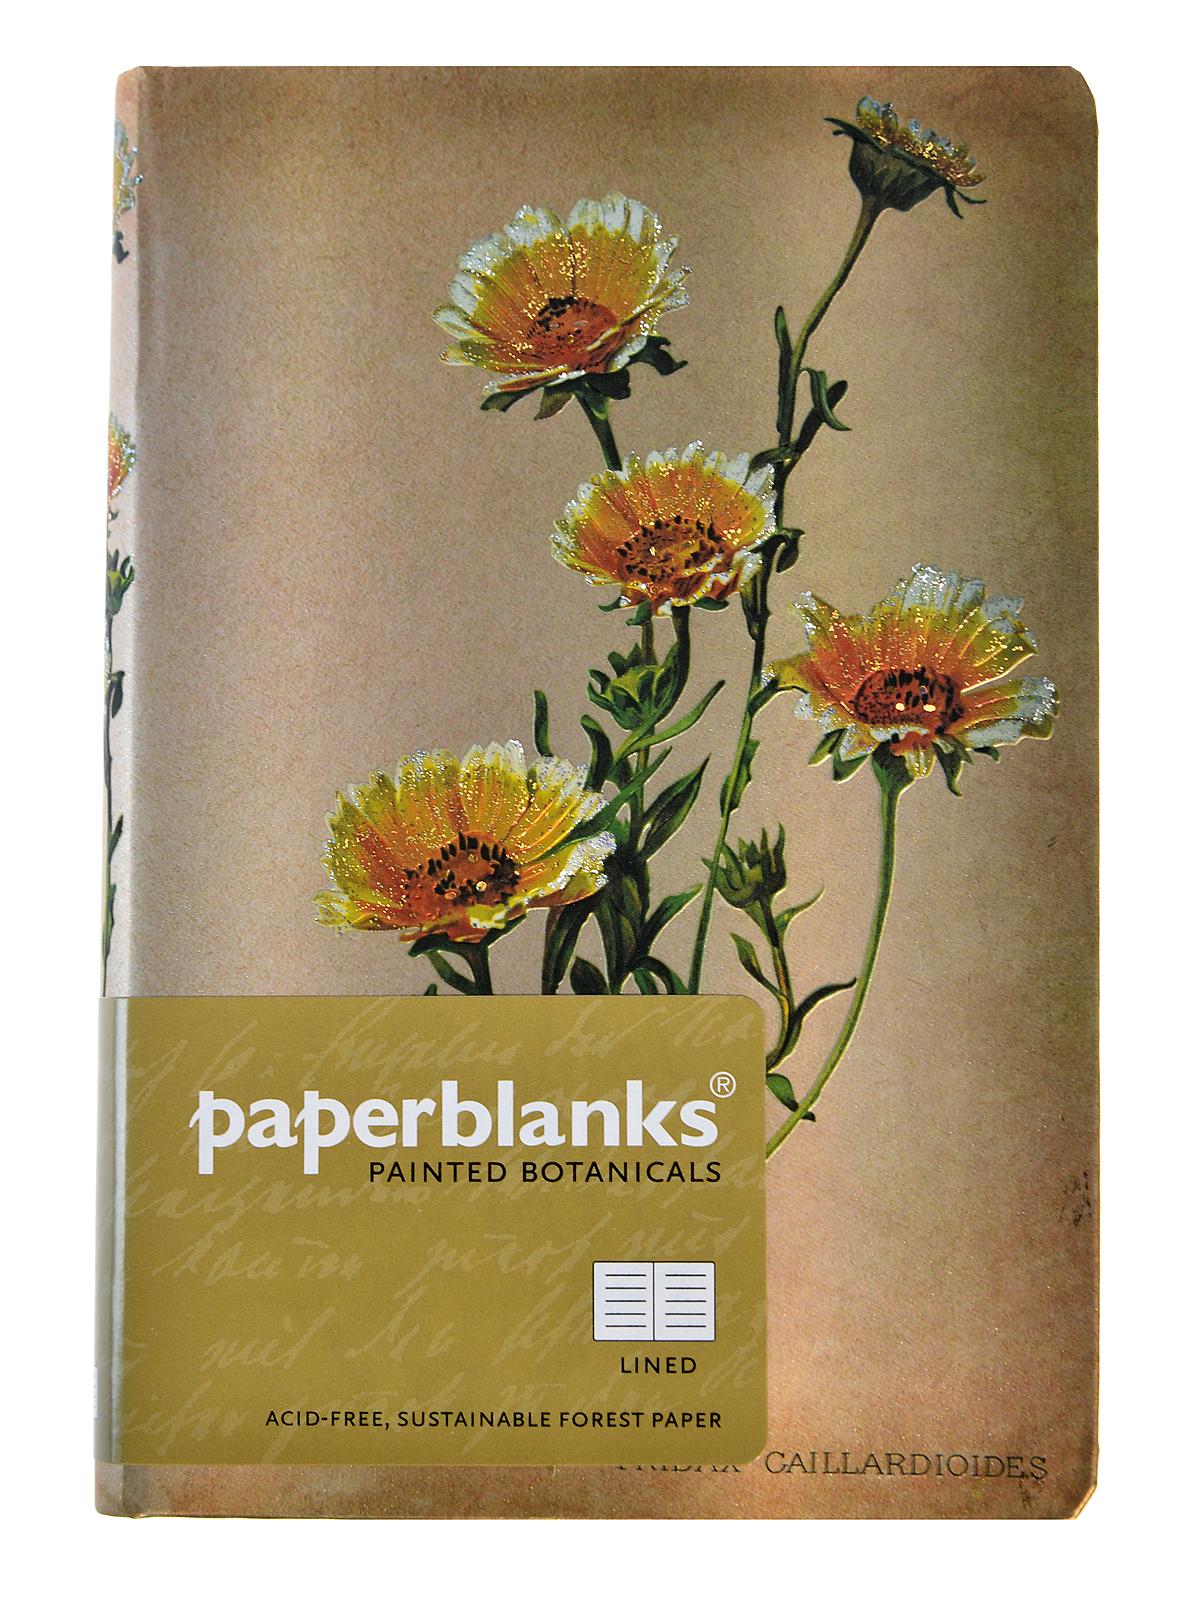 Painted Botanicals Woodland Daisies Mini, 3 3 4 In. X 5 1 2 In. 176 Pages, Unlined